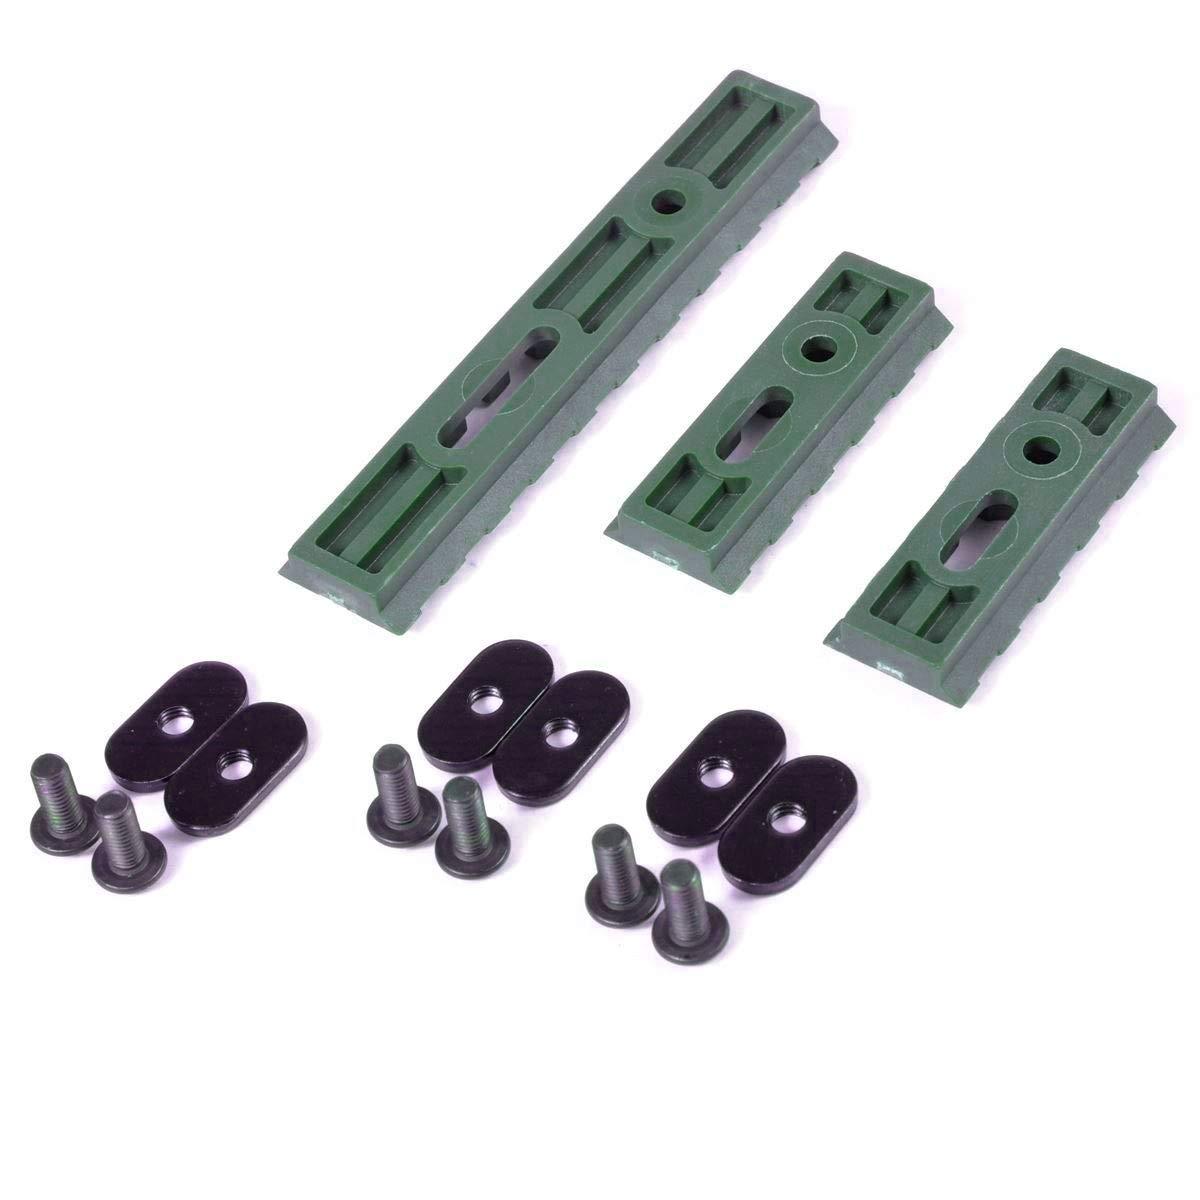 Olive Drab Green Slotted Polymer Picatinny Rail Set for Handguards Rails Green Blob Outdoors 